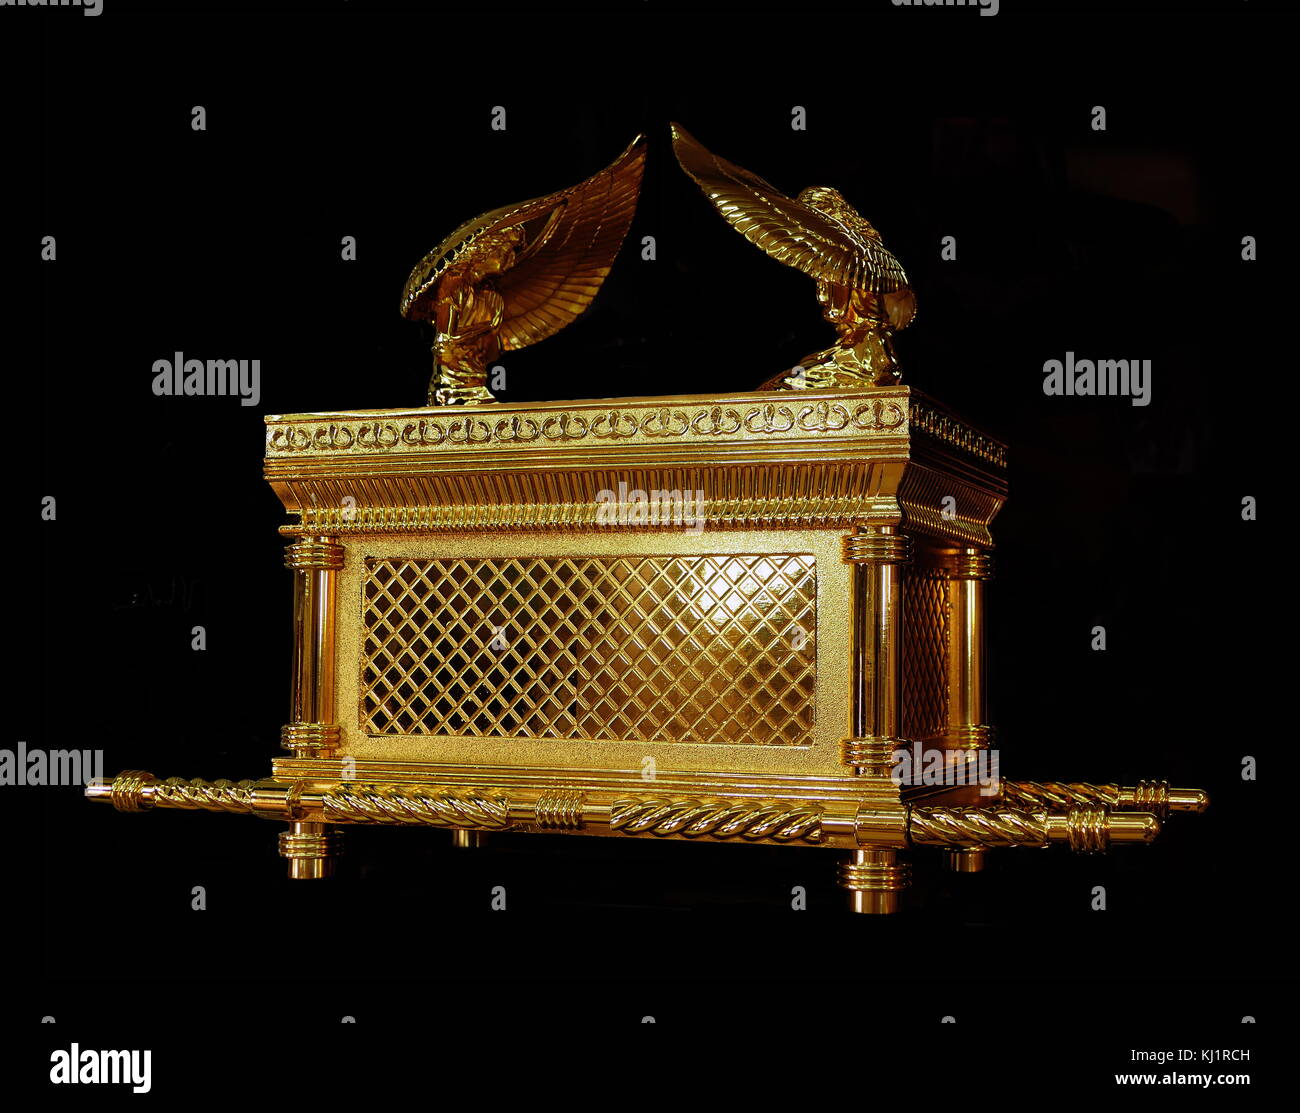 Replica of the Ark of the Covenant, a gold-covered wooden chest described in the Book of Exodus as containing the two stone tablets of the Ten Commandments. According to various texts within the Hebrew Bible, it also contained Aaron's rod and a pot of manna Stock Photo